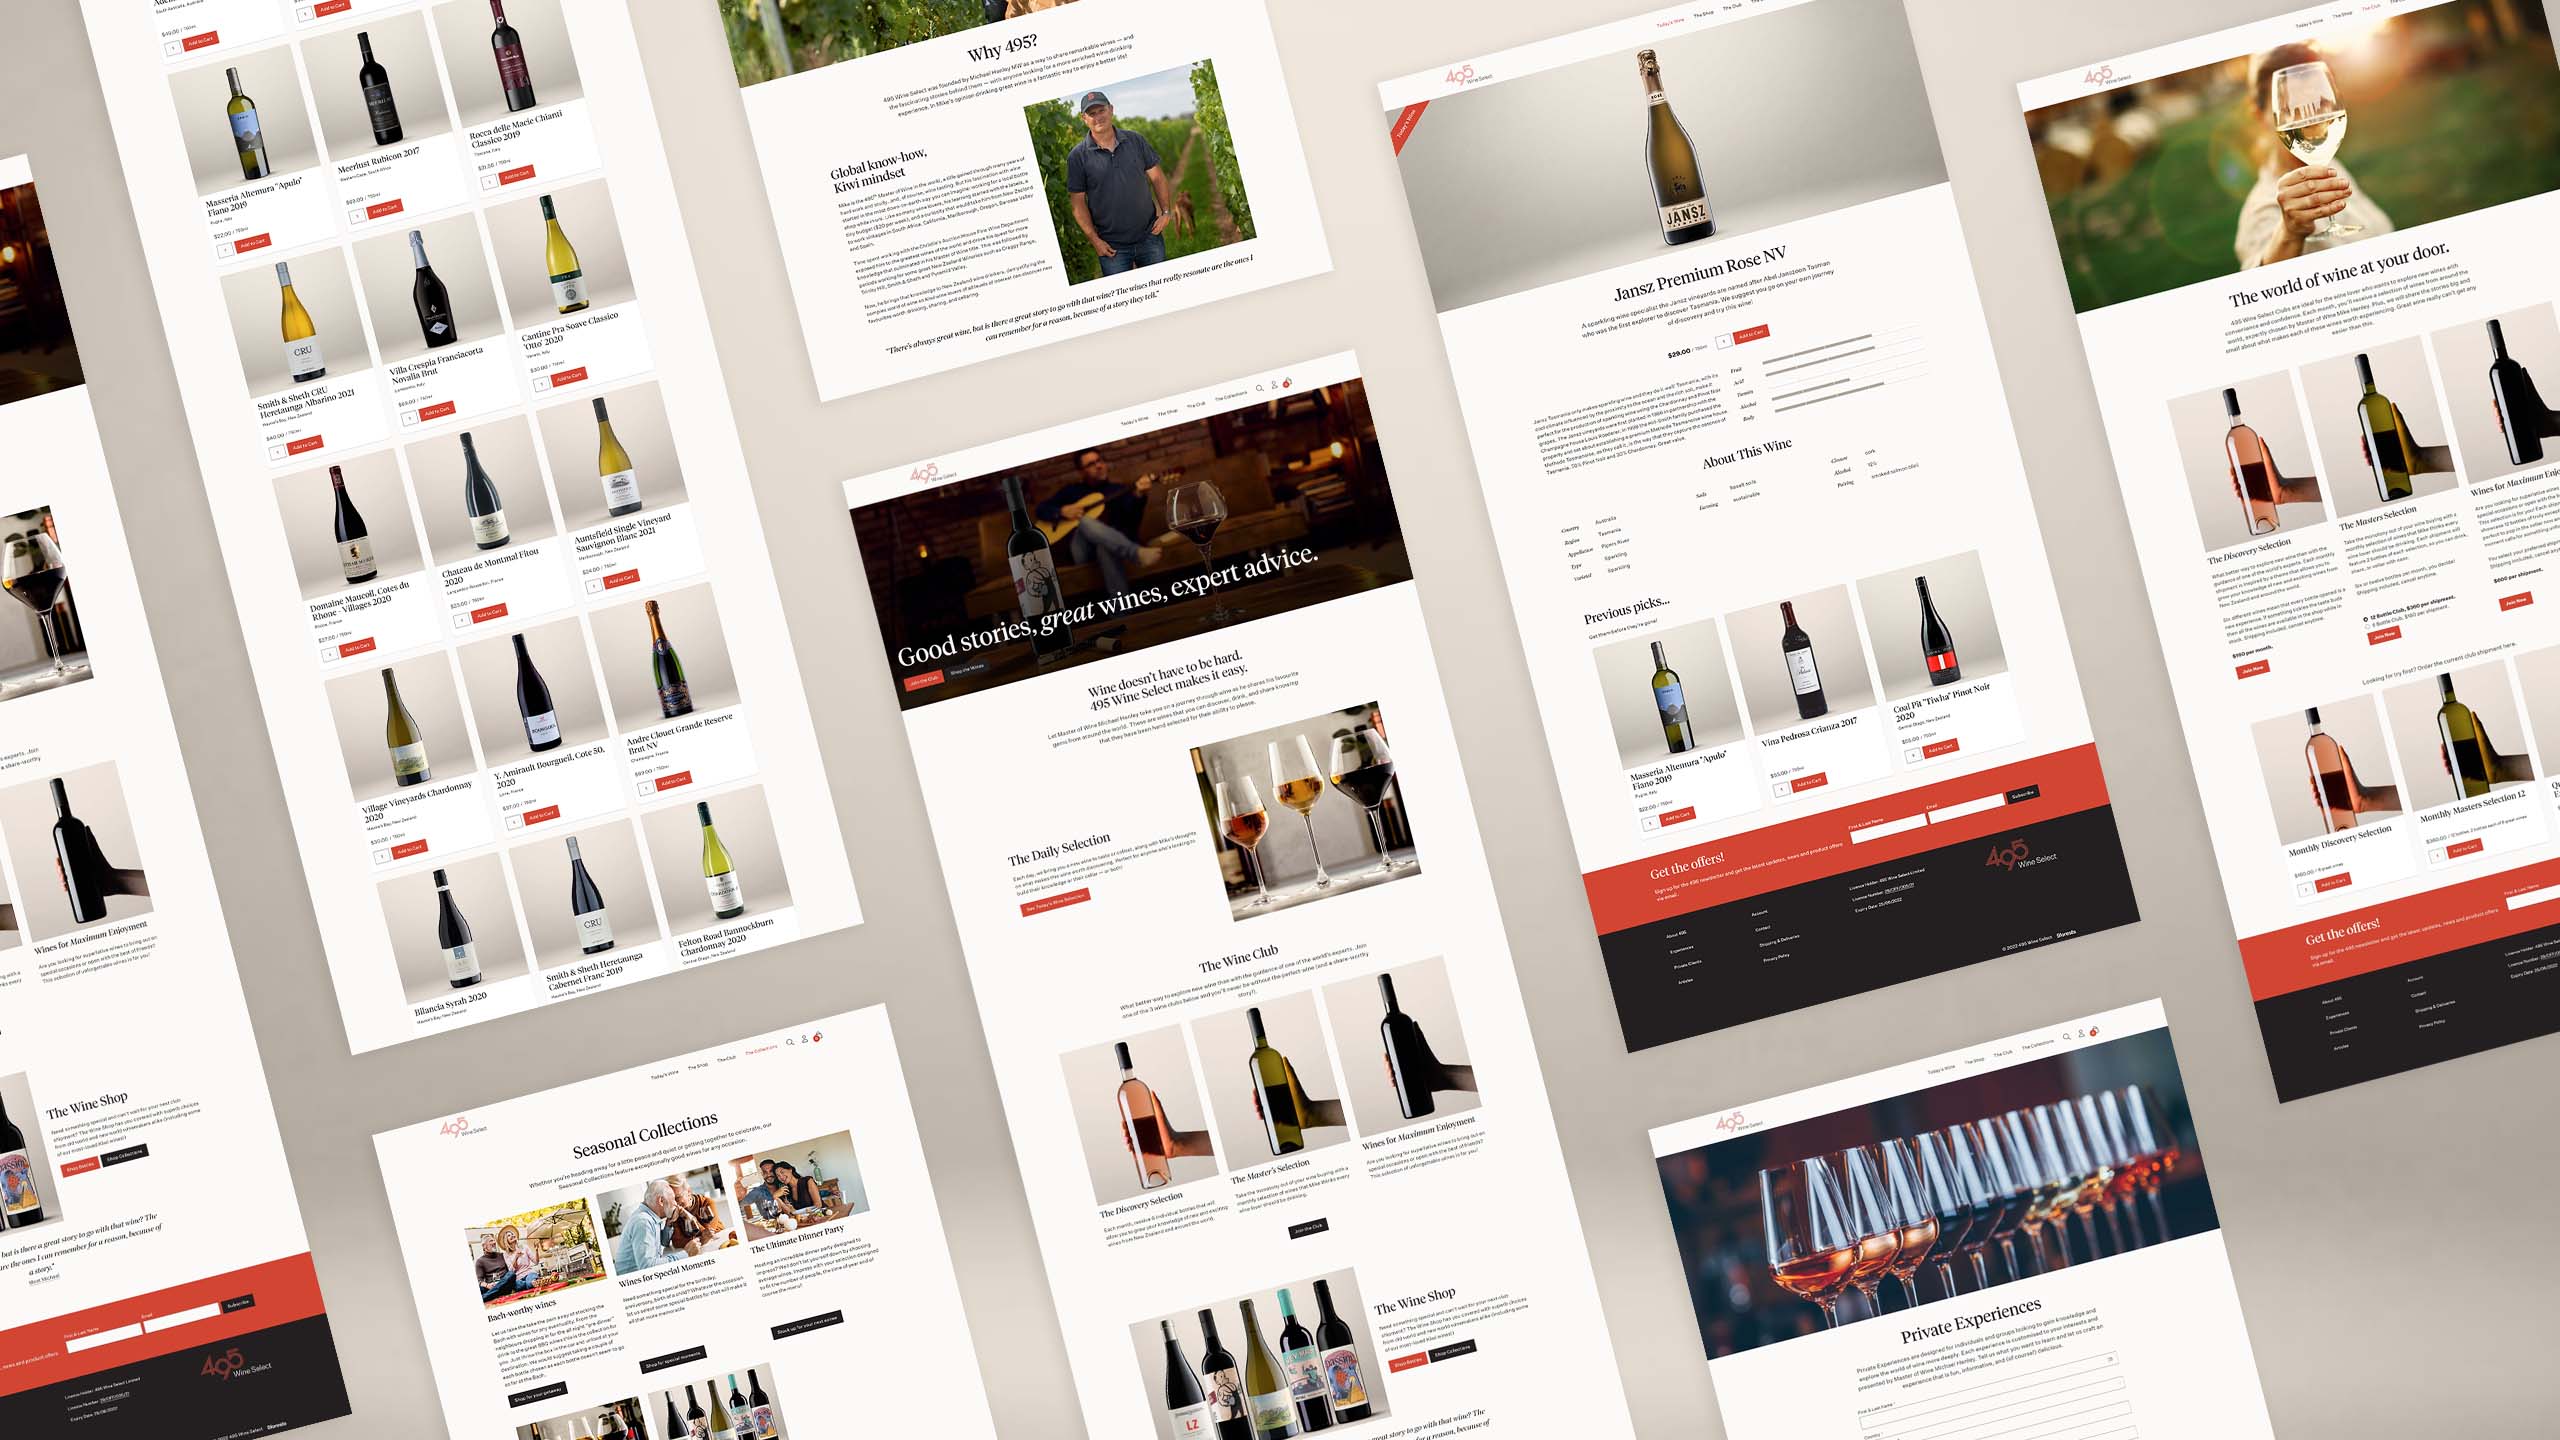 Styled mockup showing various 495 Wine Select website pages designed by 5forests